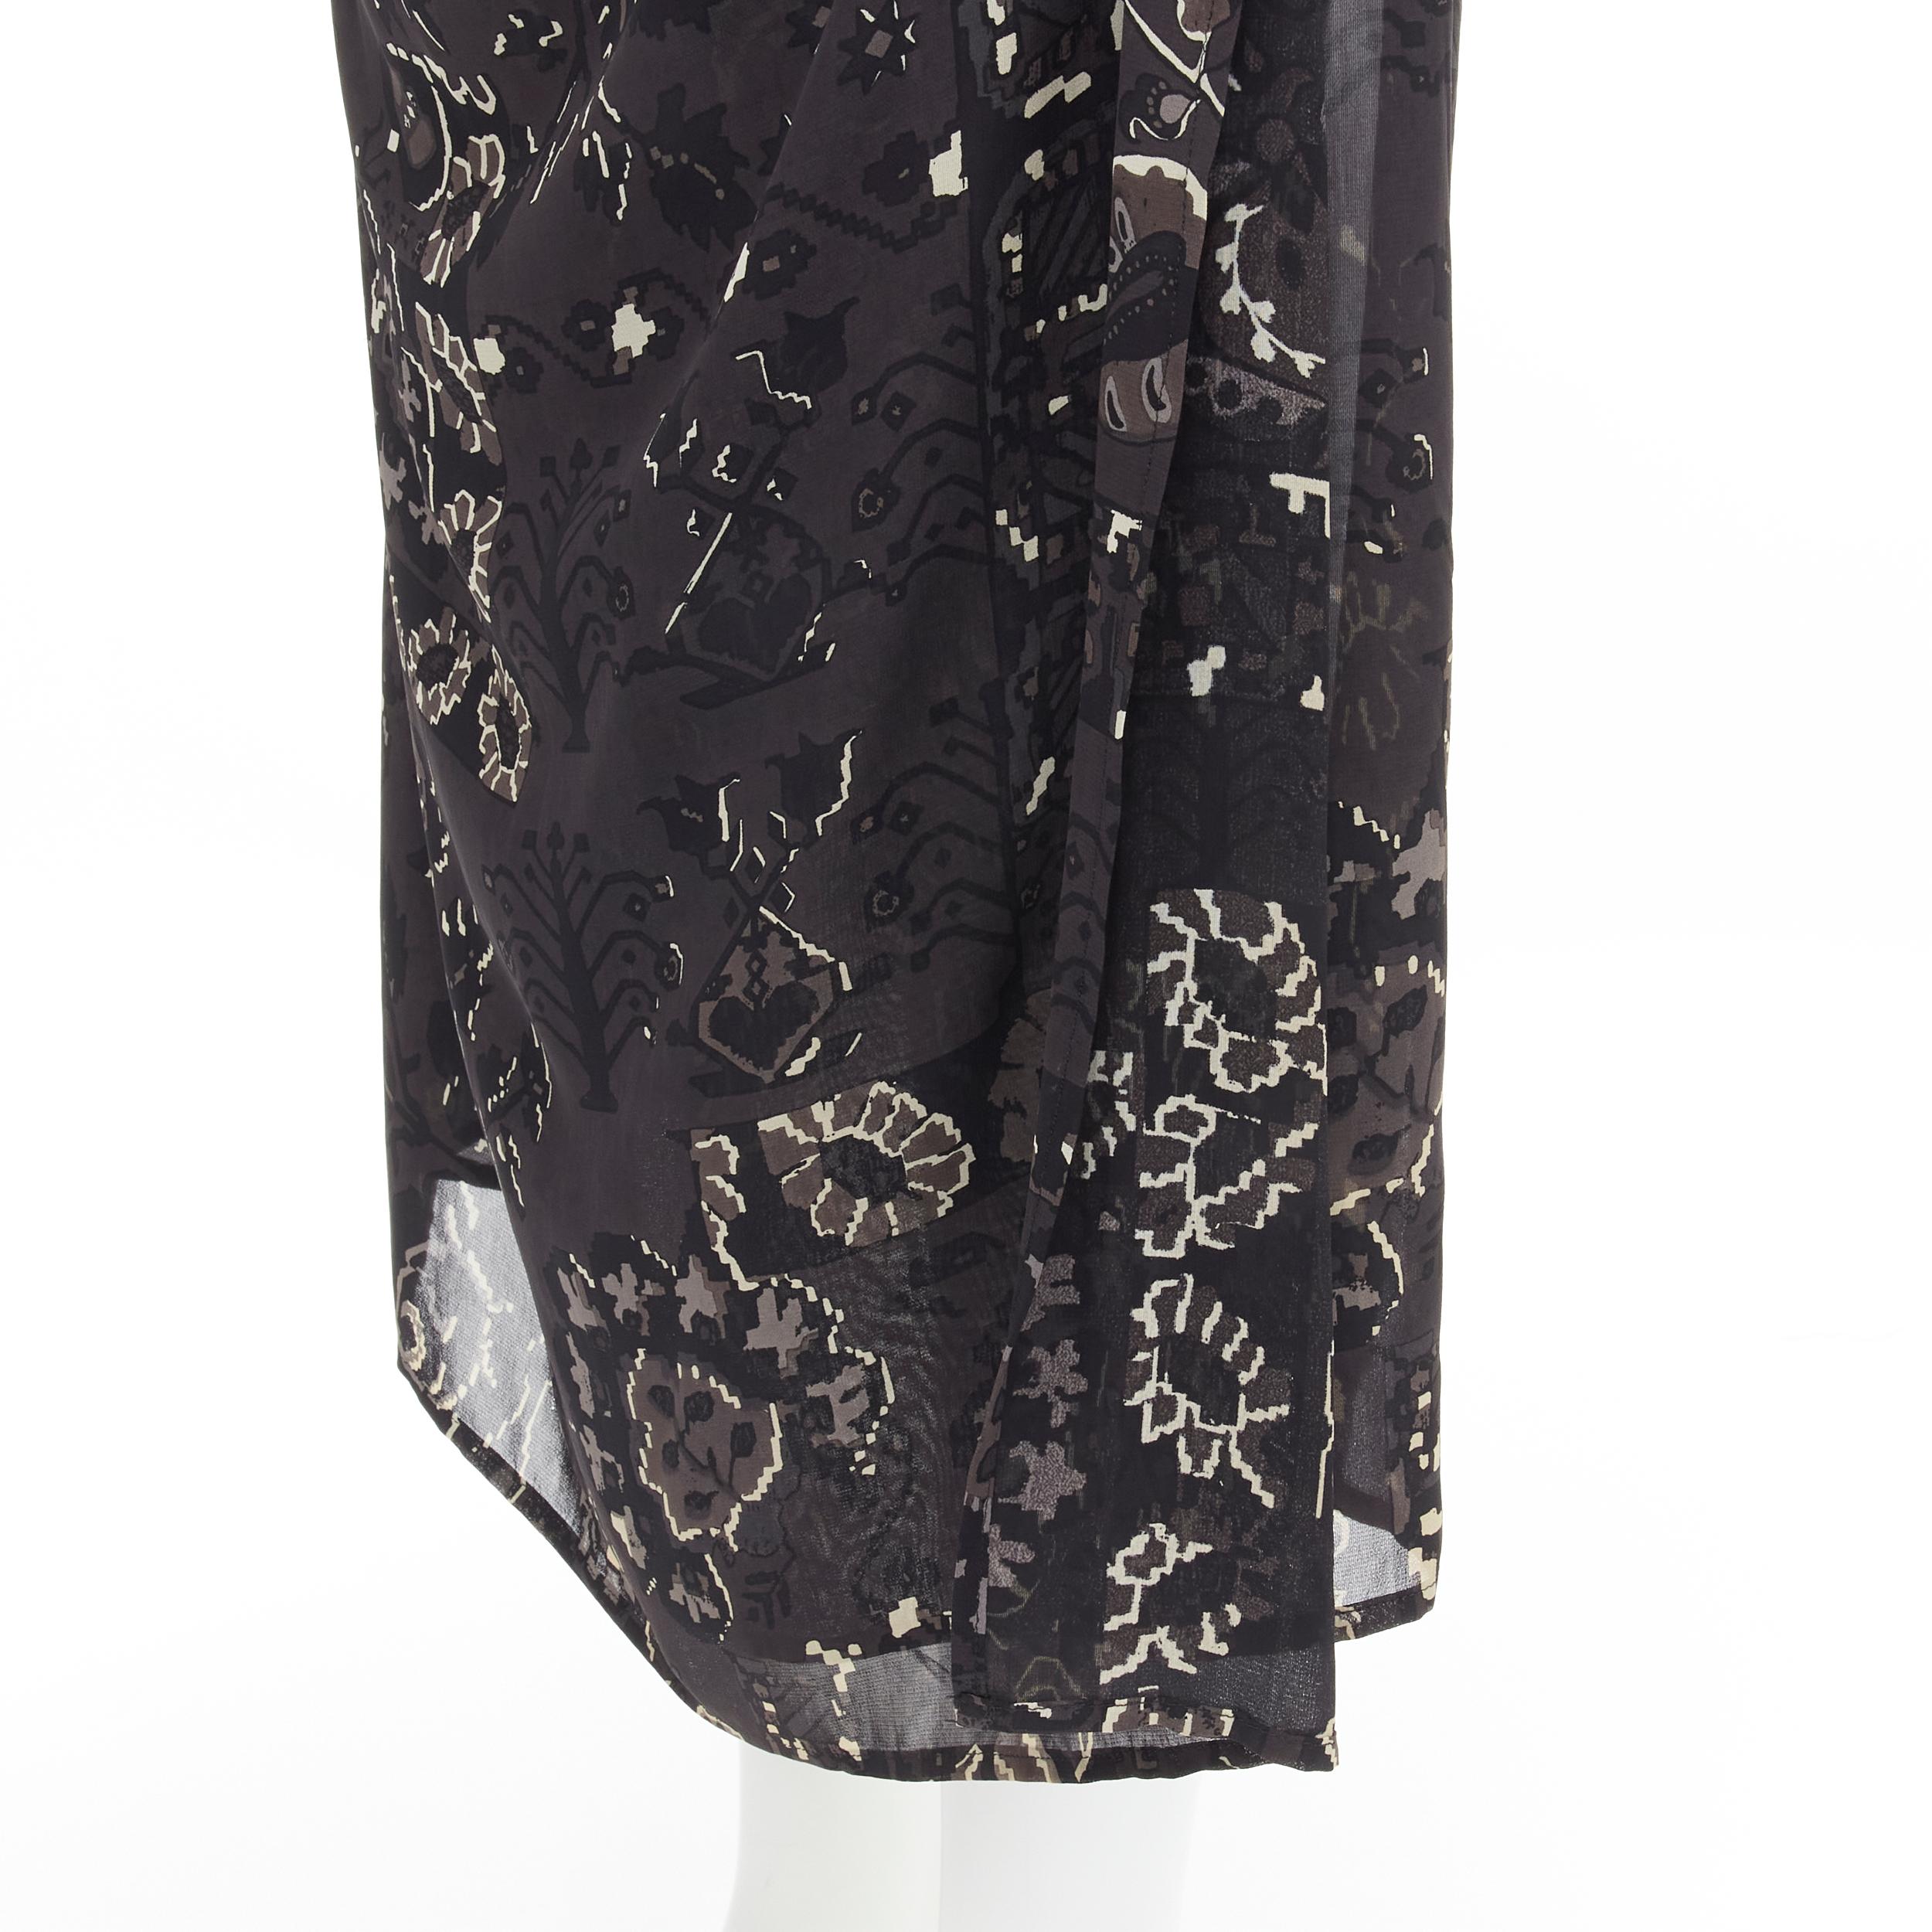 YOHJI YAMAMOTO black pixelated floral paisley print cut out draped front midi dr For Sale 1